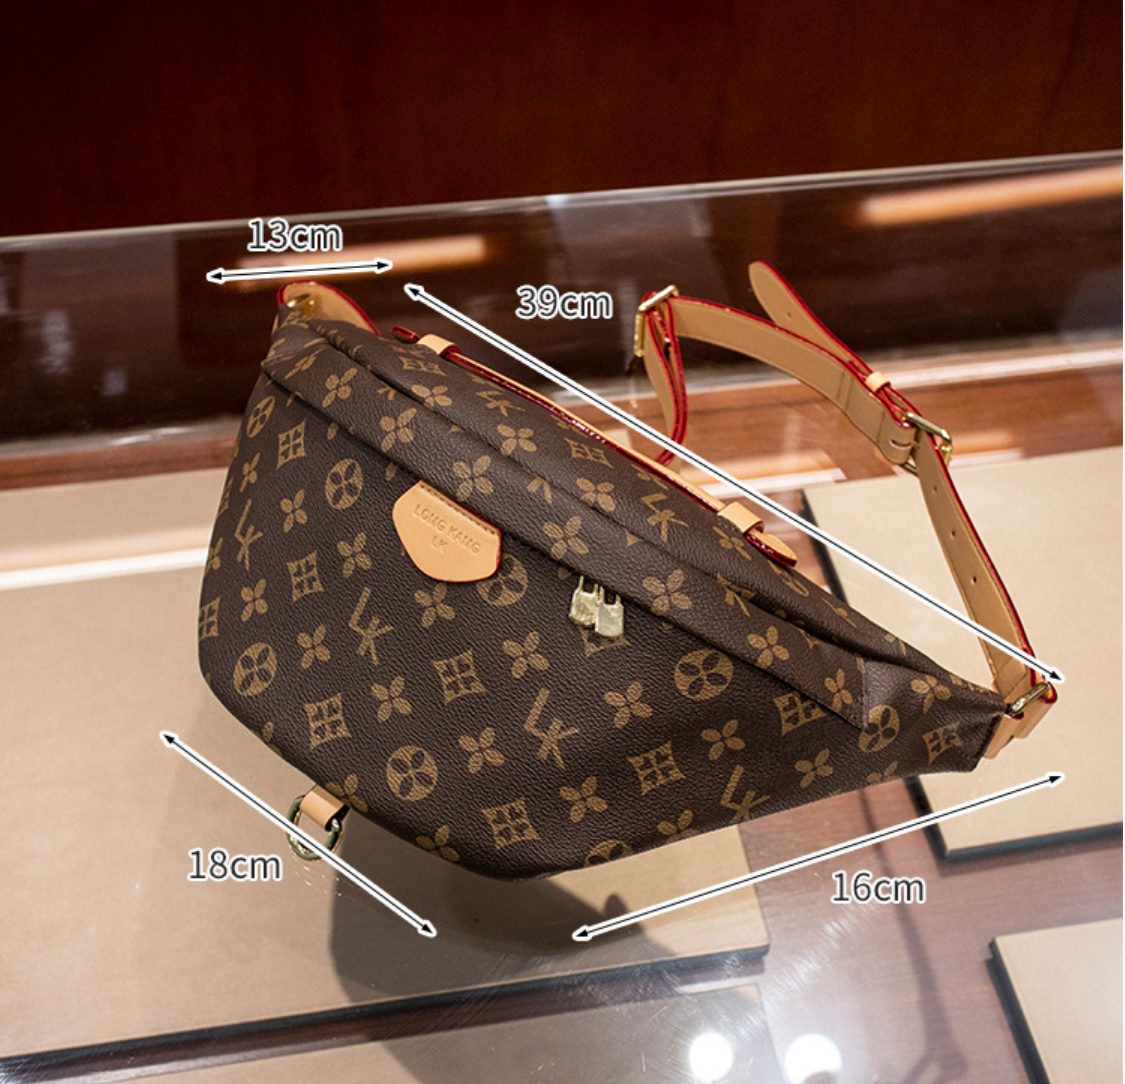 Buy Louis Vuitton LV Bum Bag Dupe CL023 here and Save Money